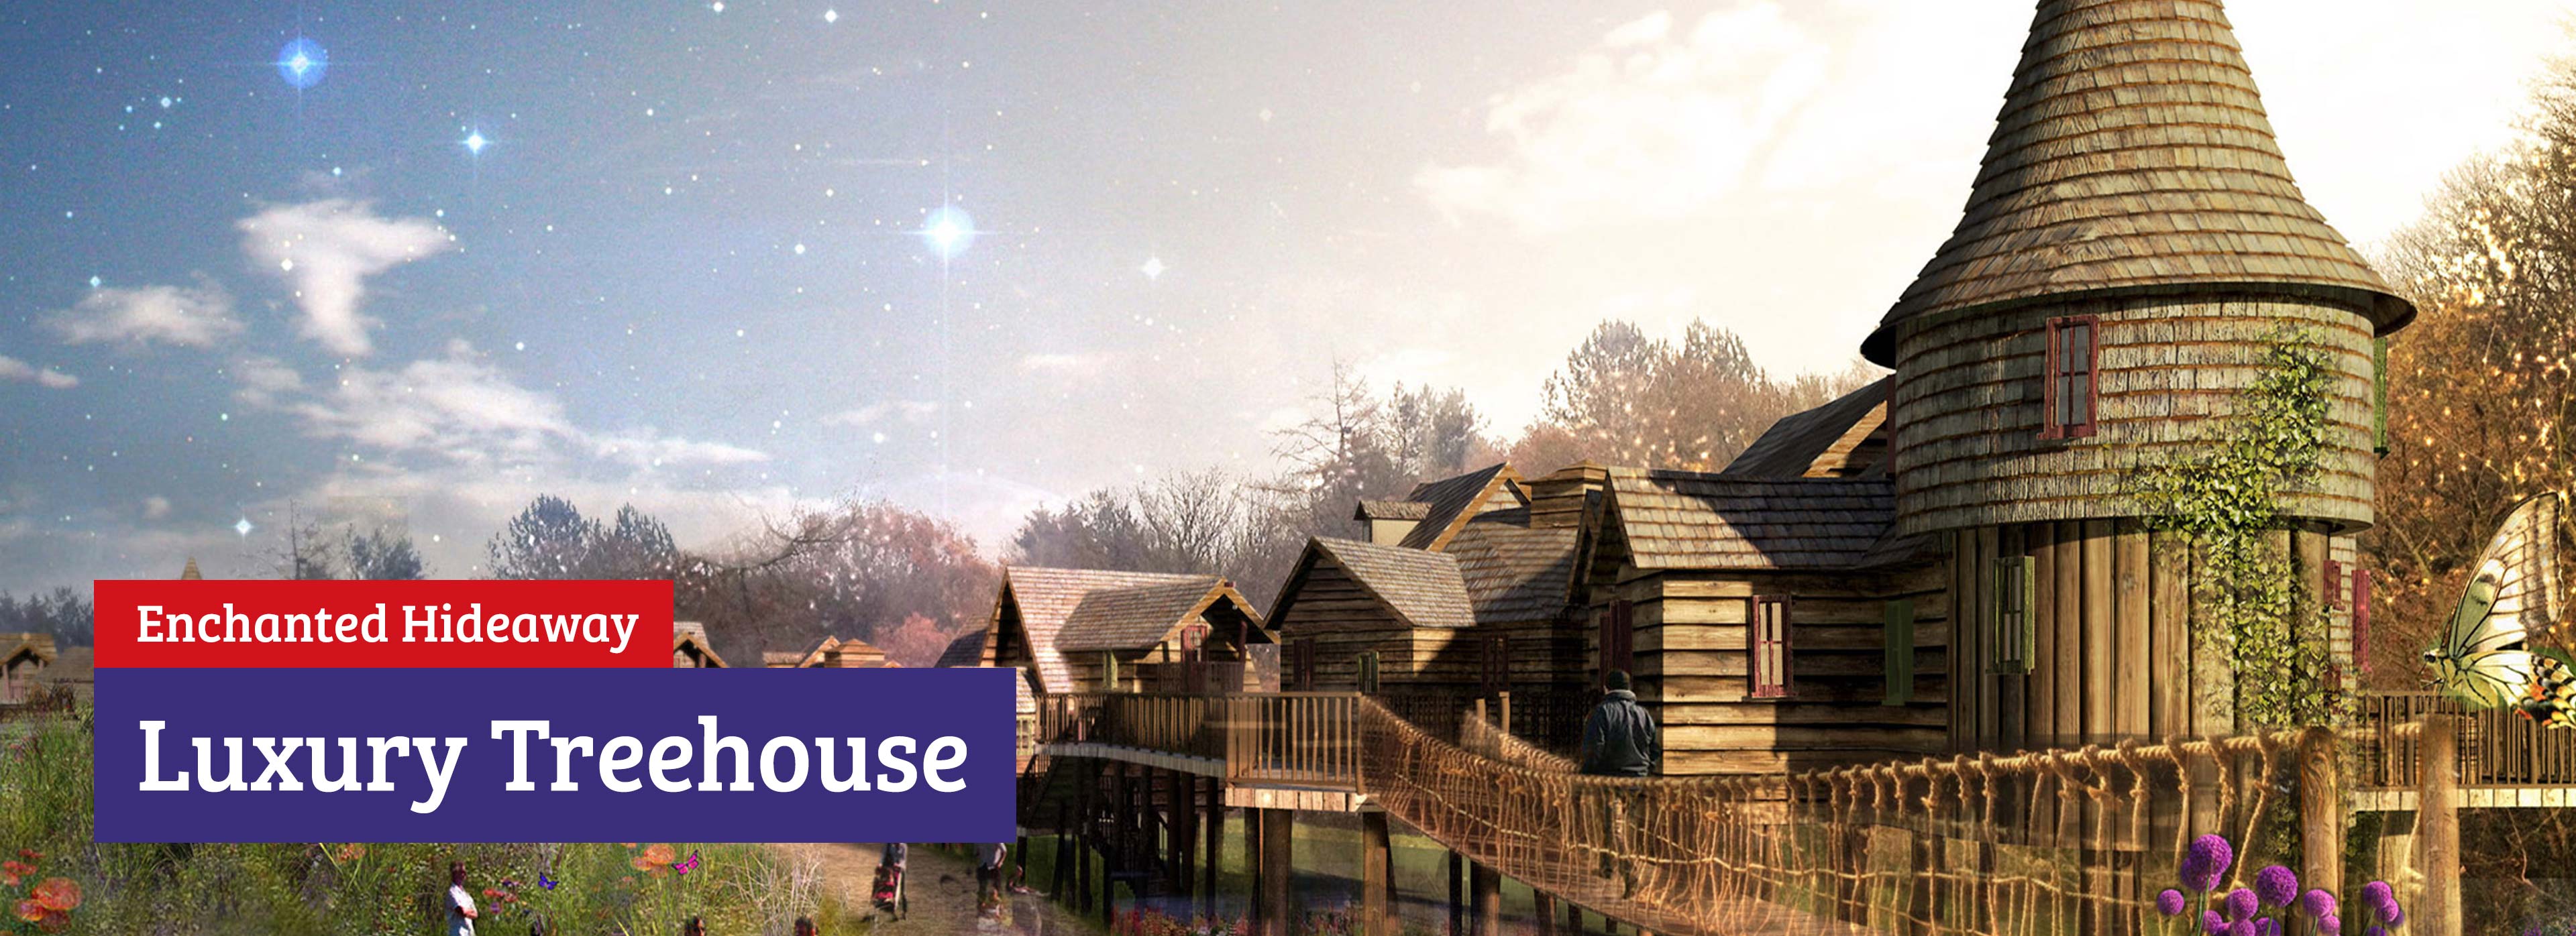 Enchanted Village Luxury Treehouses at the Alton Towers Resort